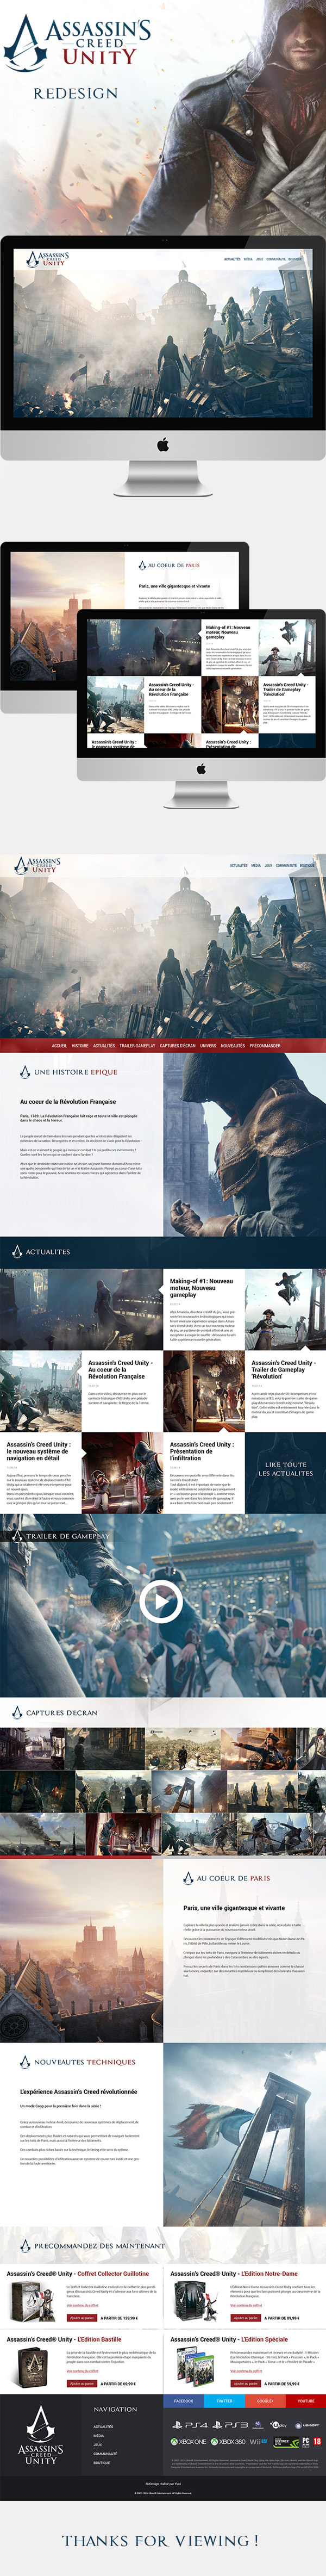 Assassin's Creed Unity unity Assassin's Creed assassin game Gaming jeu video arno redesign Webdesign Paris revolution france